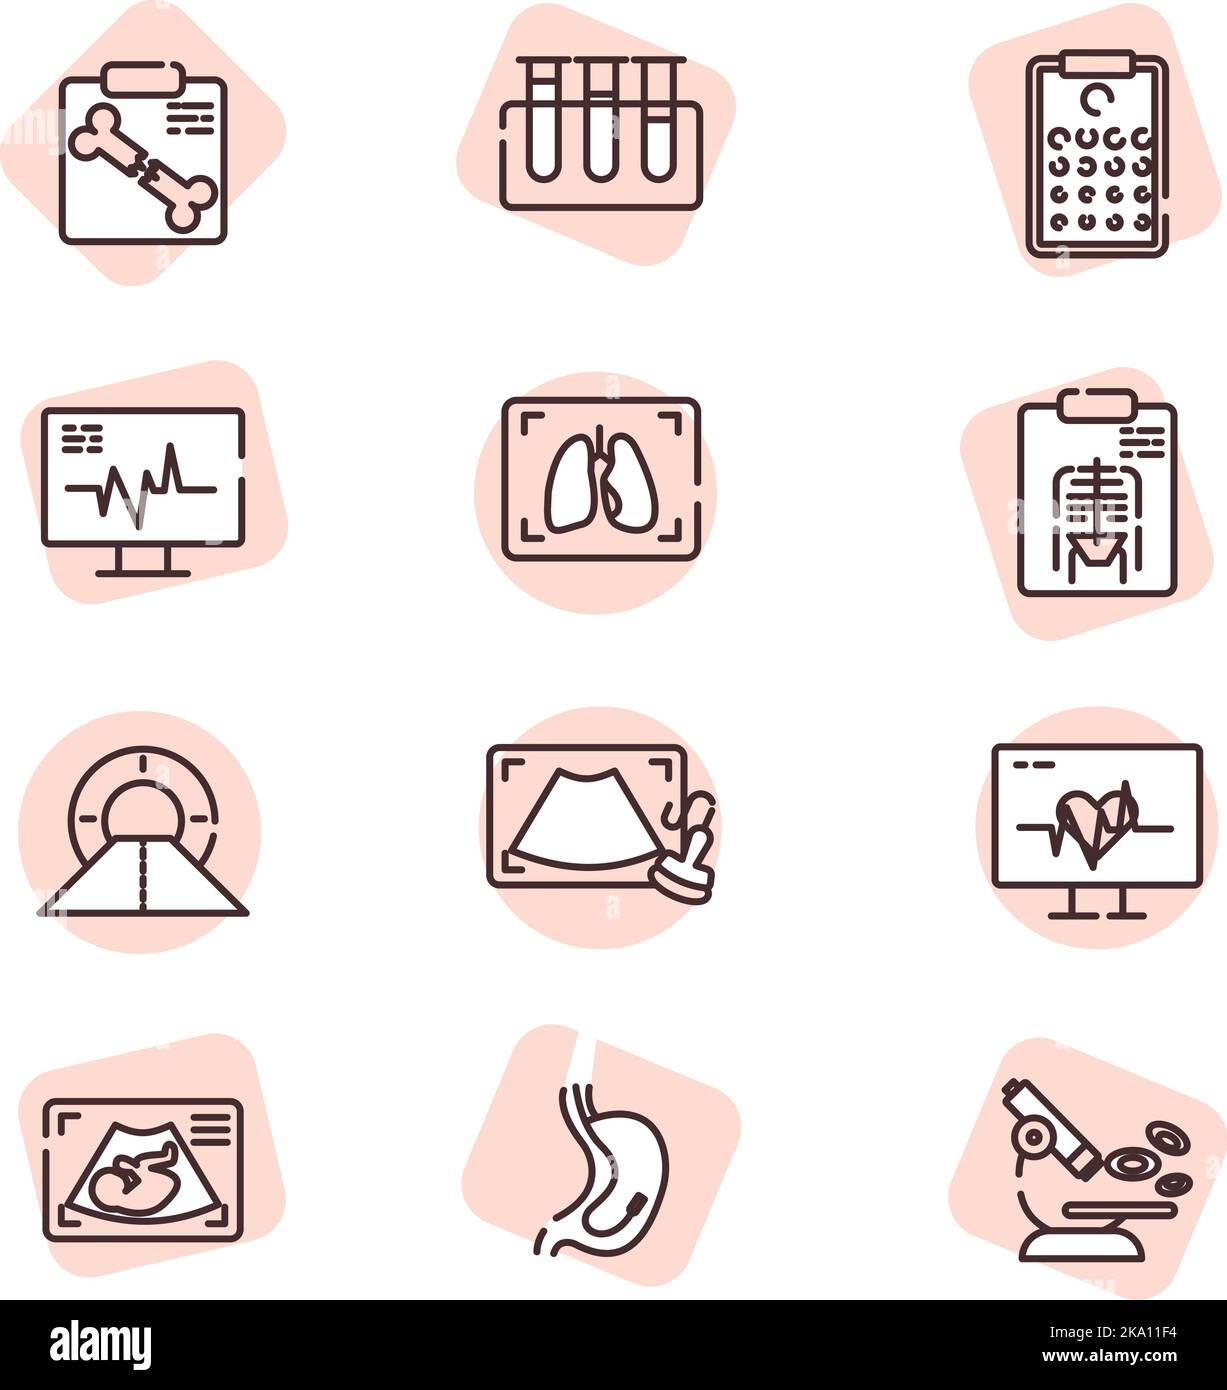 Health icon set, illustration or icon, vector on white background. Stock Vector